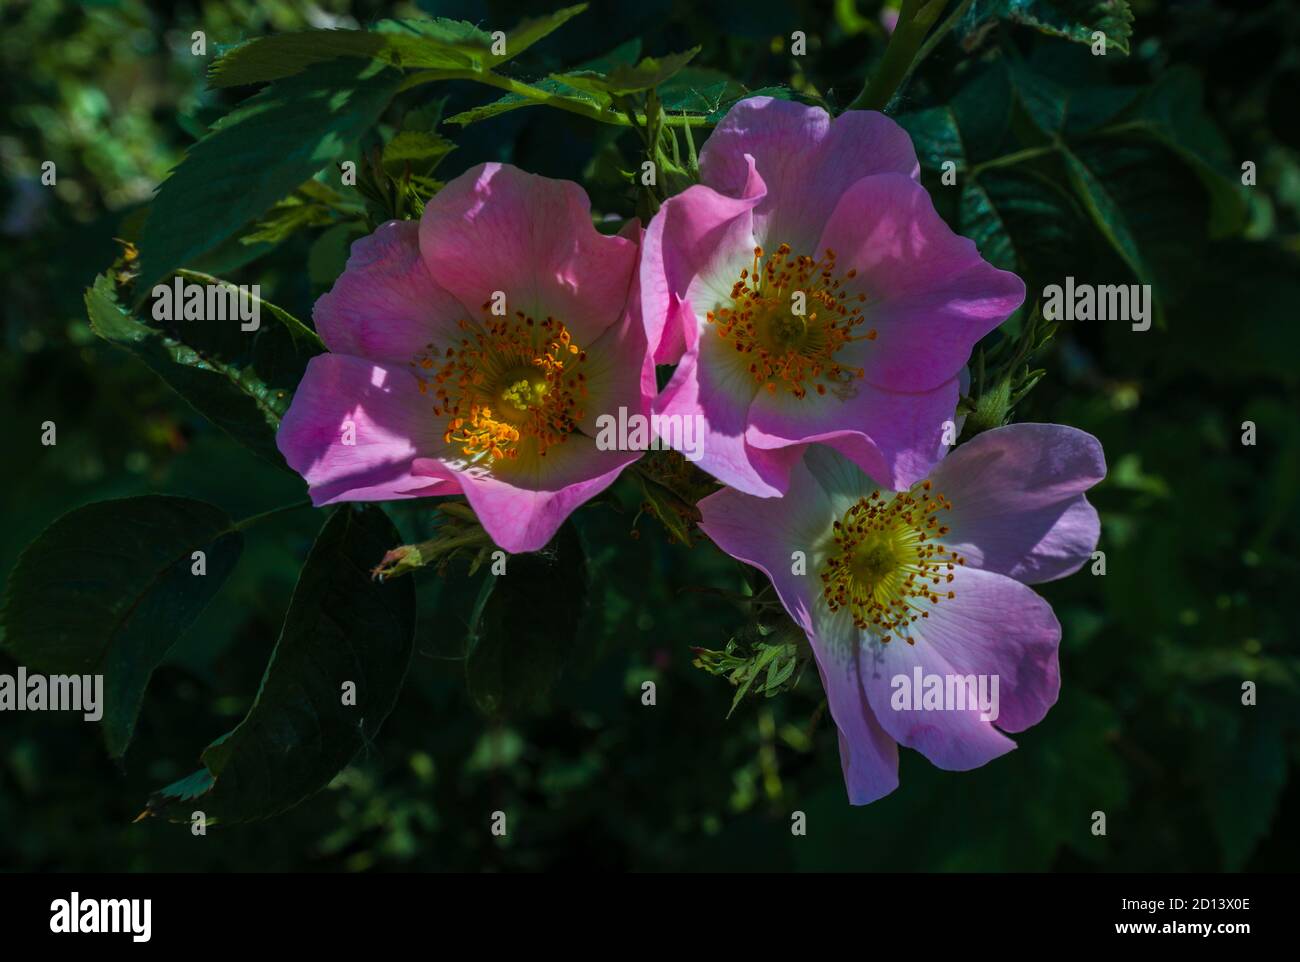 The wild roses are fragrant and also have medicinal properties.. Stock Photo